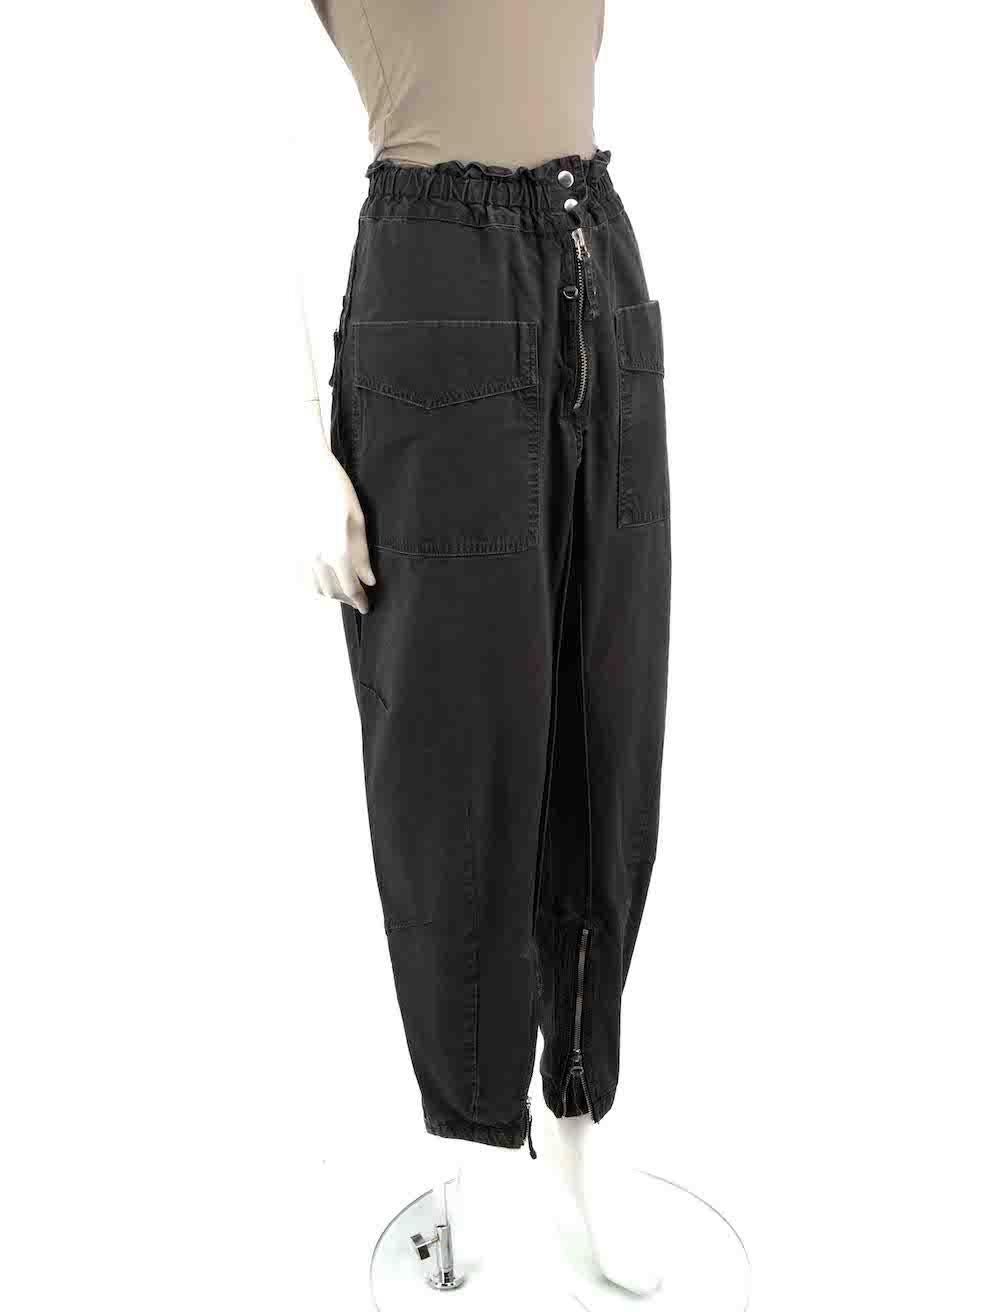 CONDITION is Very good. Hardly any visible wear to trousers is evident on this used Isabel Marant Étoile designer resale item.
 
 Details
 Grey
 Cotton
 Tapered trousers
 High rise
 Elasticated waistband
 Front zip closure with snap buttons
 2x